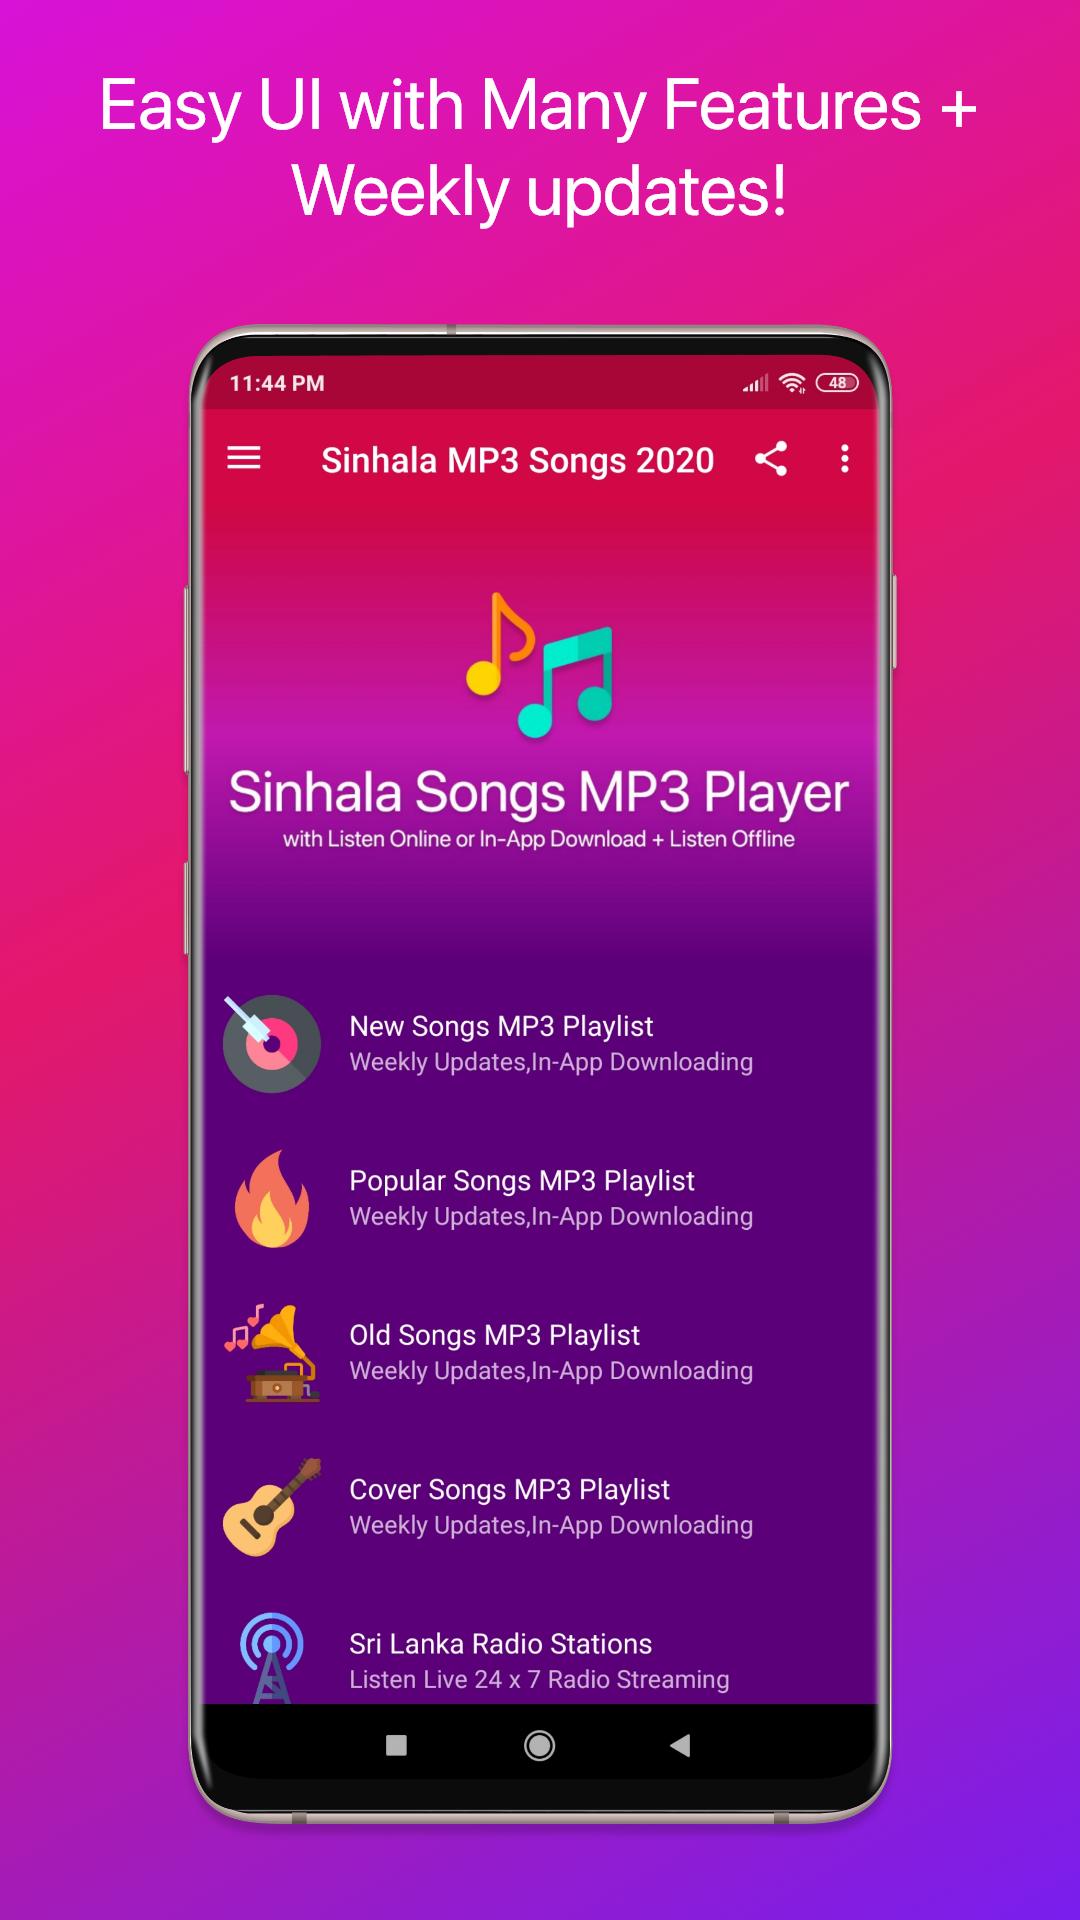 Sinhala Songs MP3 2020 - ලස්සන සින්දු for Android - APK Download